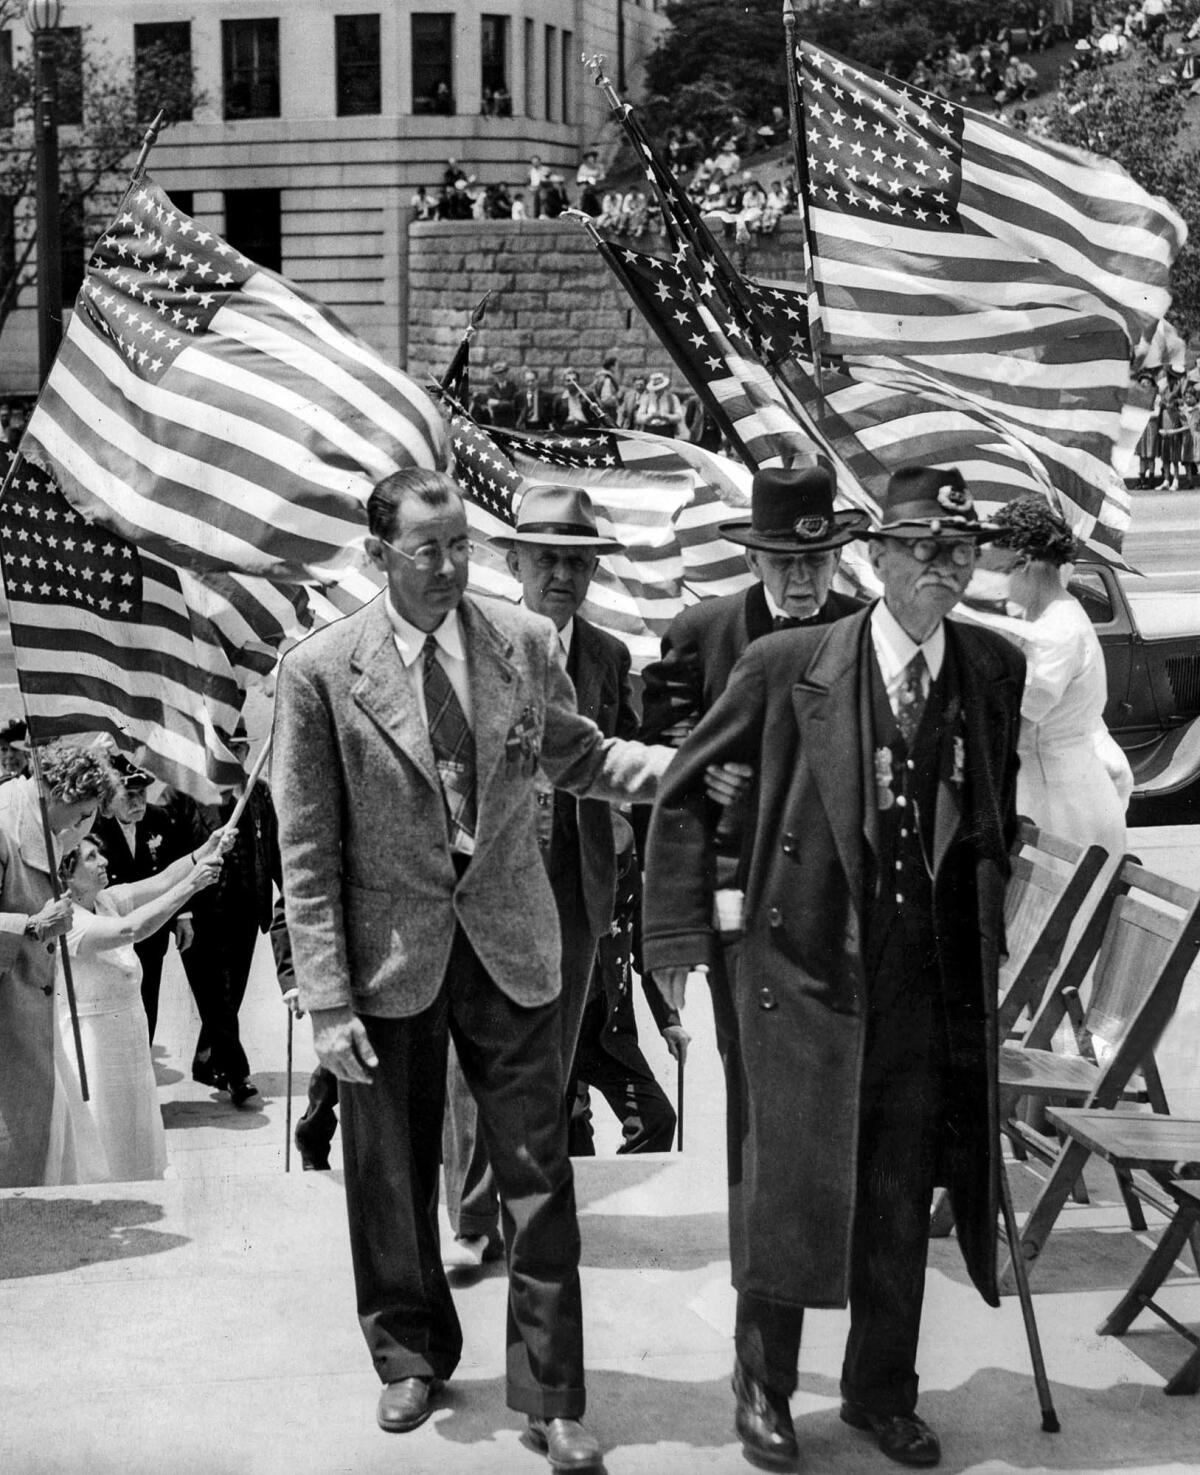 May 30, 1942: Civil War veterans are helped through an arch of flags during a Memorial Day observance at Los Angeles City Hall. The Civil War veterans insisted on walking.